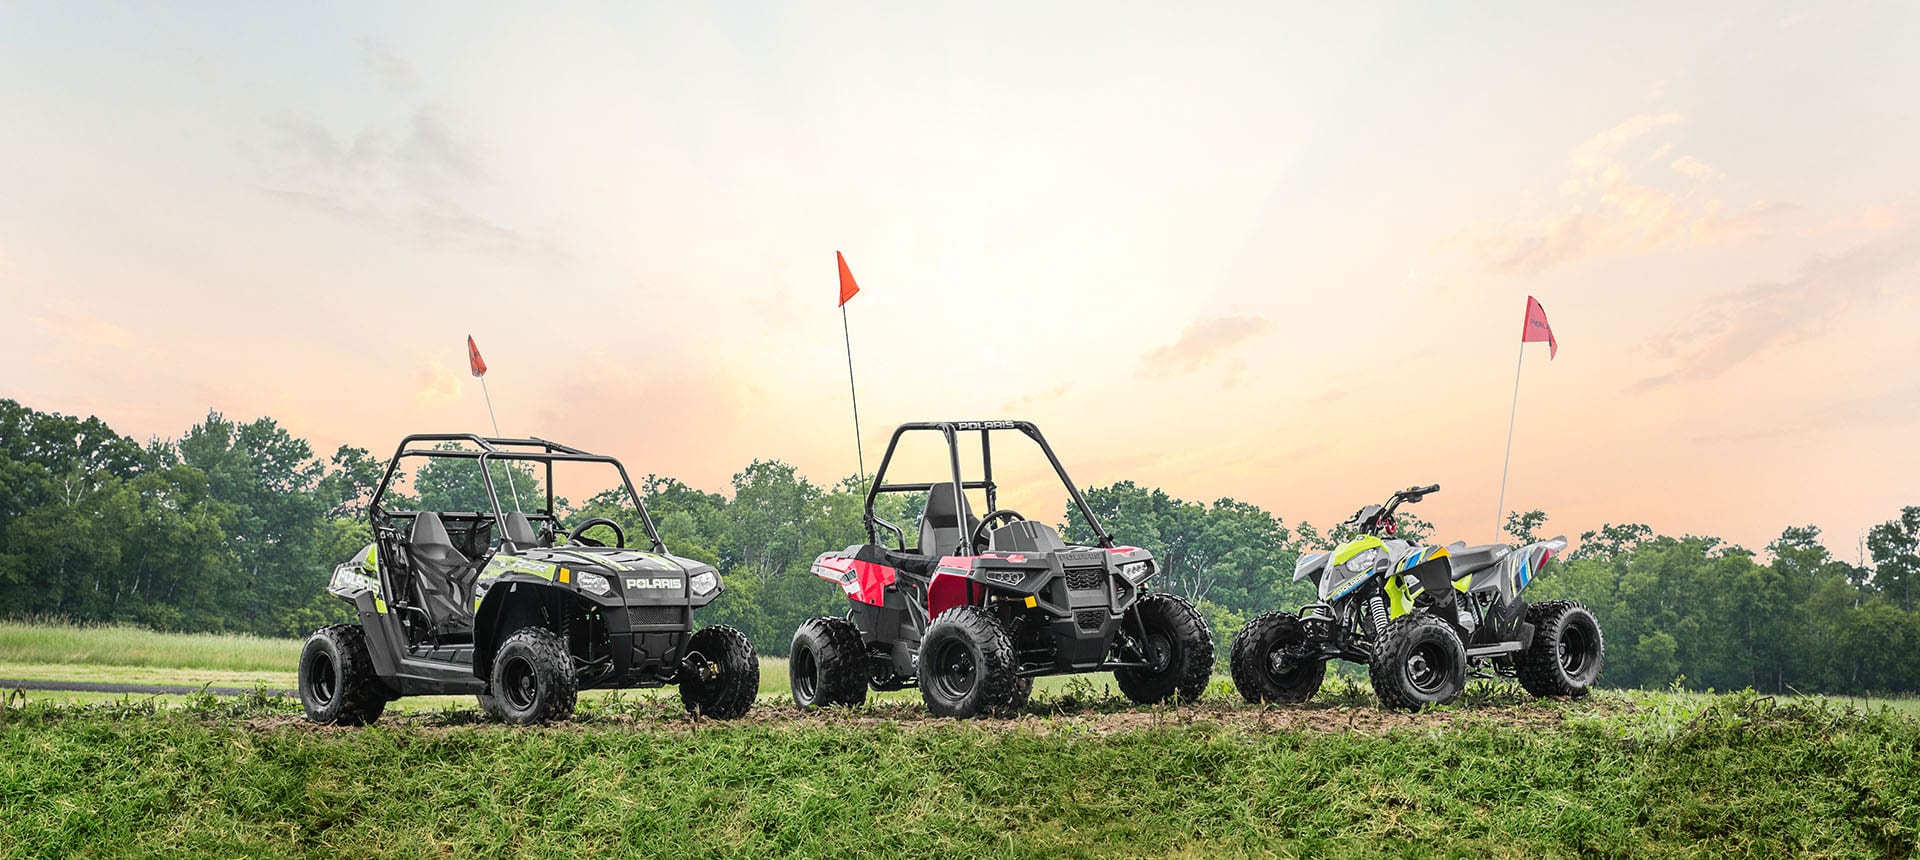 RZR 170 EFI YOUTH OFFROAD VEHICLE